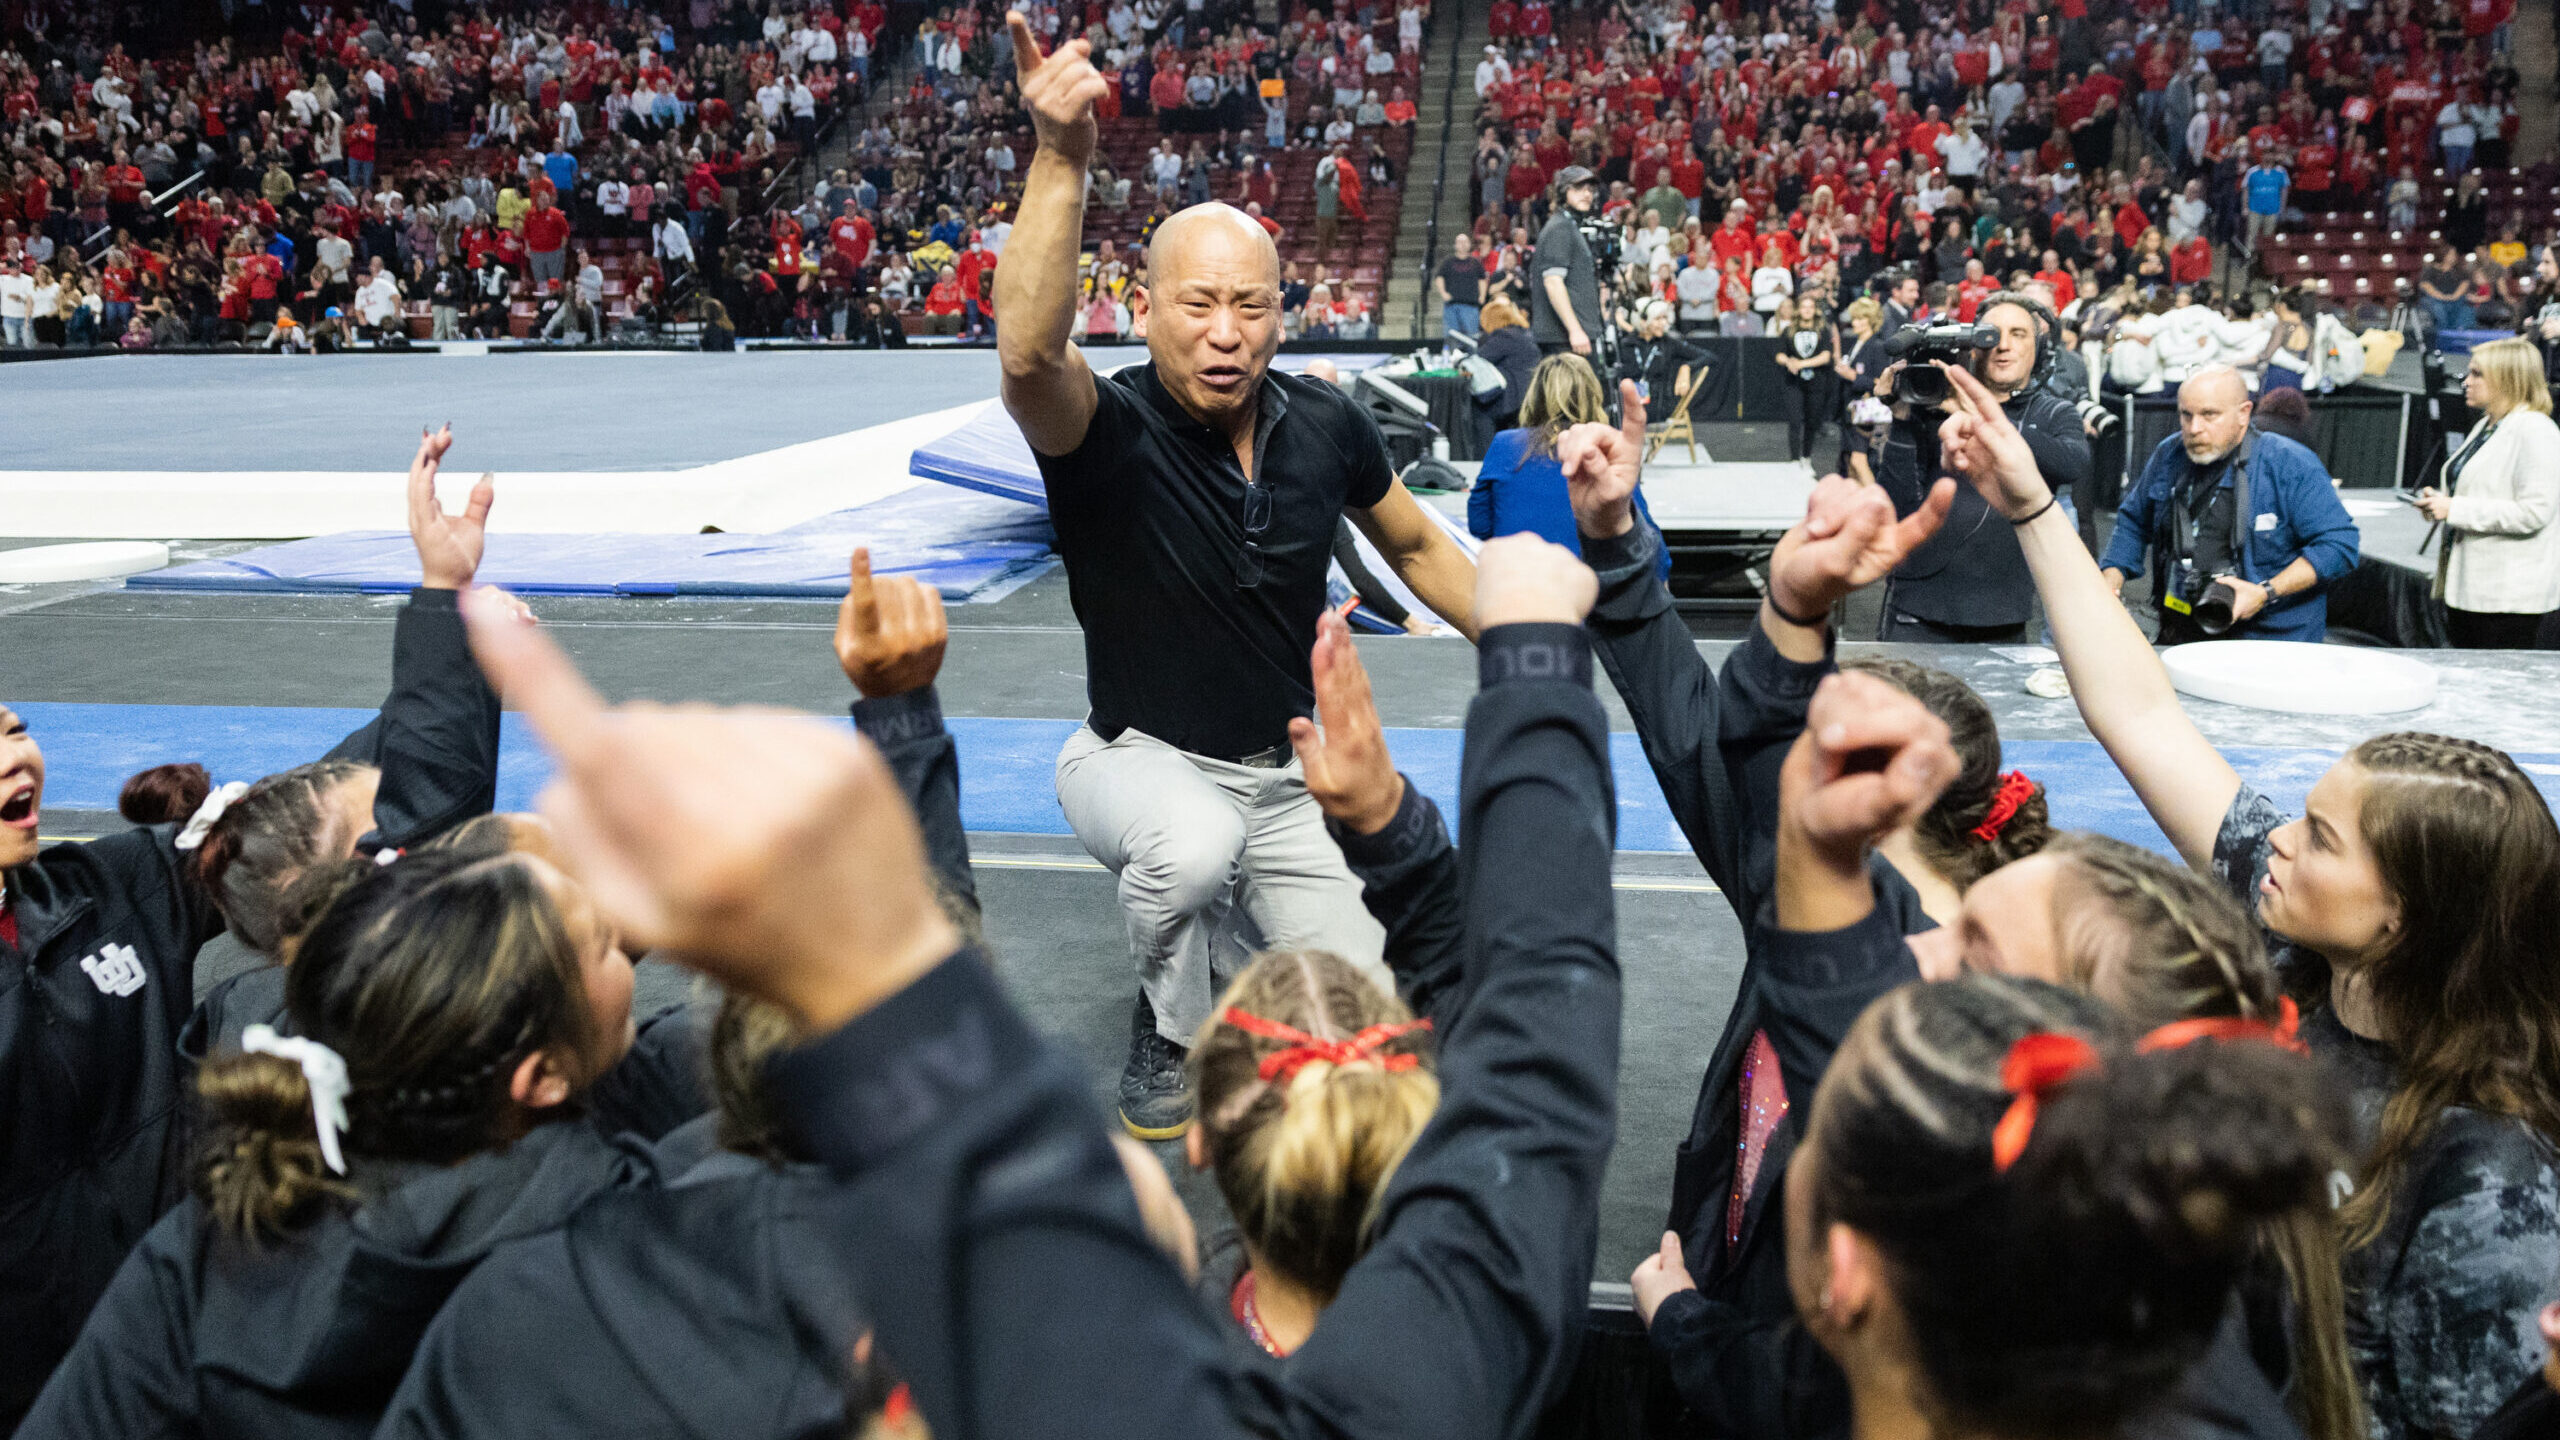 Utah’s head coach Tom Farden leads the team in a chant after winning the Pac-12 Gymnastics Champi...